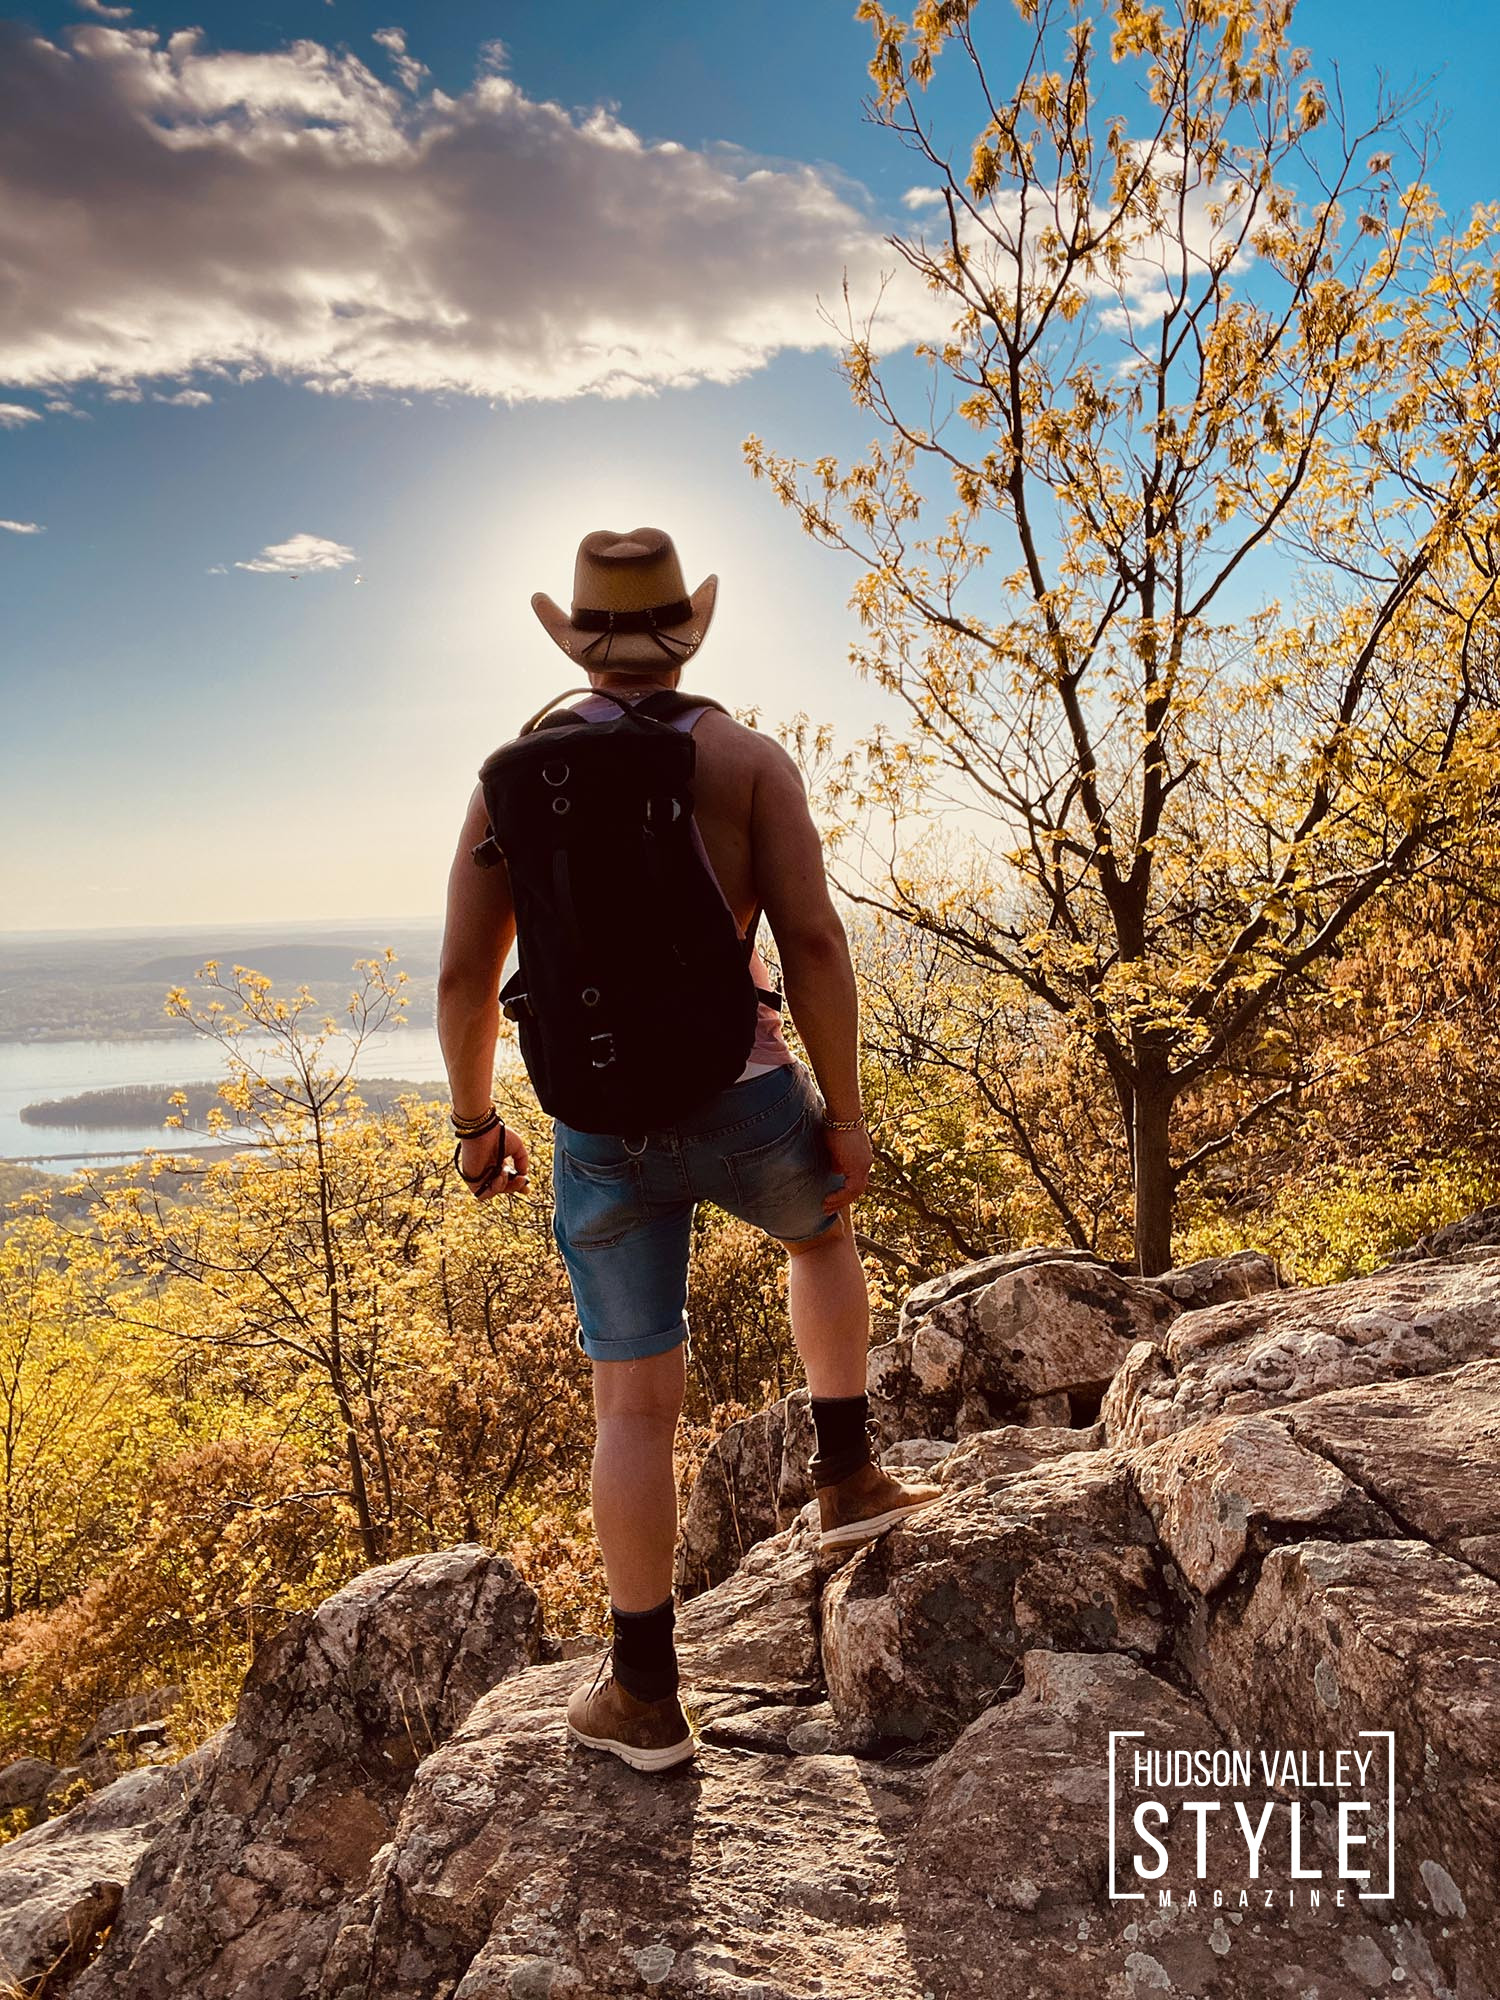 Experience the Magic of Hudson Valley with Alluvion Vacations – by Hudson Valley & Catskills Travel Guides Max and Dino – Presented by Alluvion Vacations